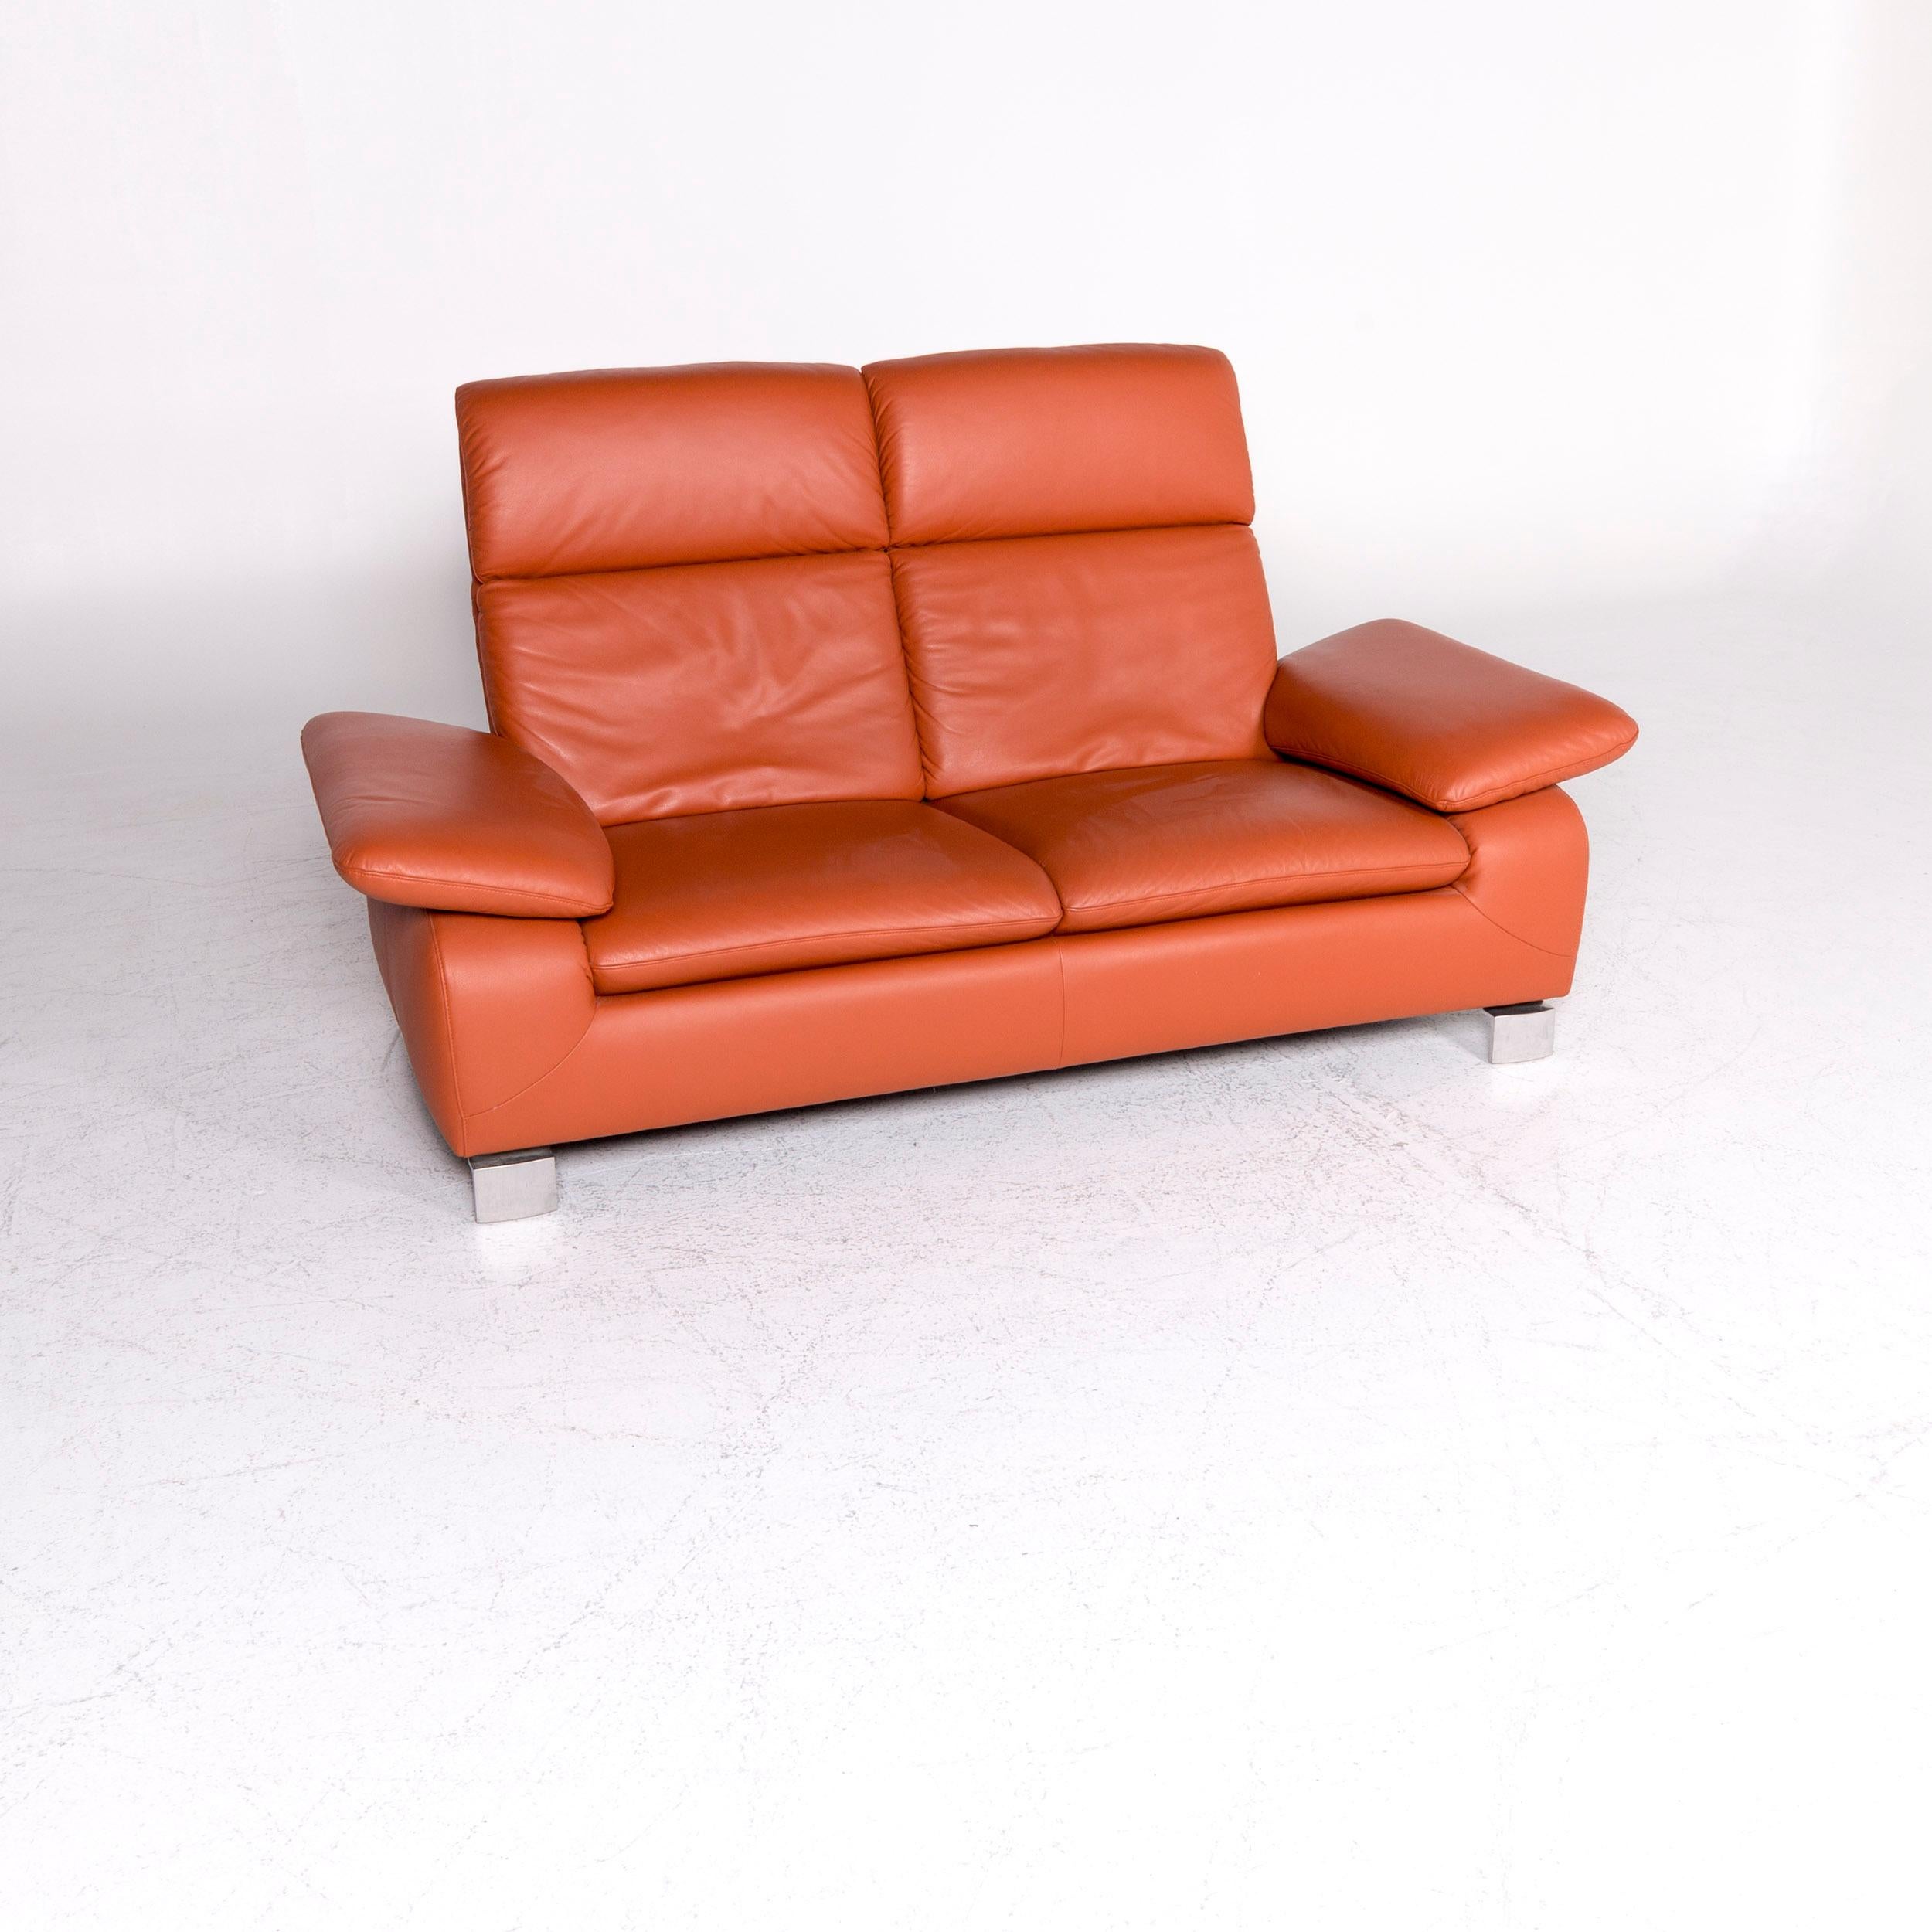 We bring to you an Ewald Schillig designer leather sofa orange two-seat couch.


Product measurements in centimeters:

Depth 88
Width 190
Height 103
Seat-height 42
Rest-height 57
Seat-depth 55
Seat-width 117
Back-height 61.